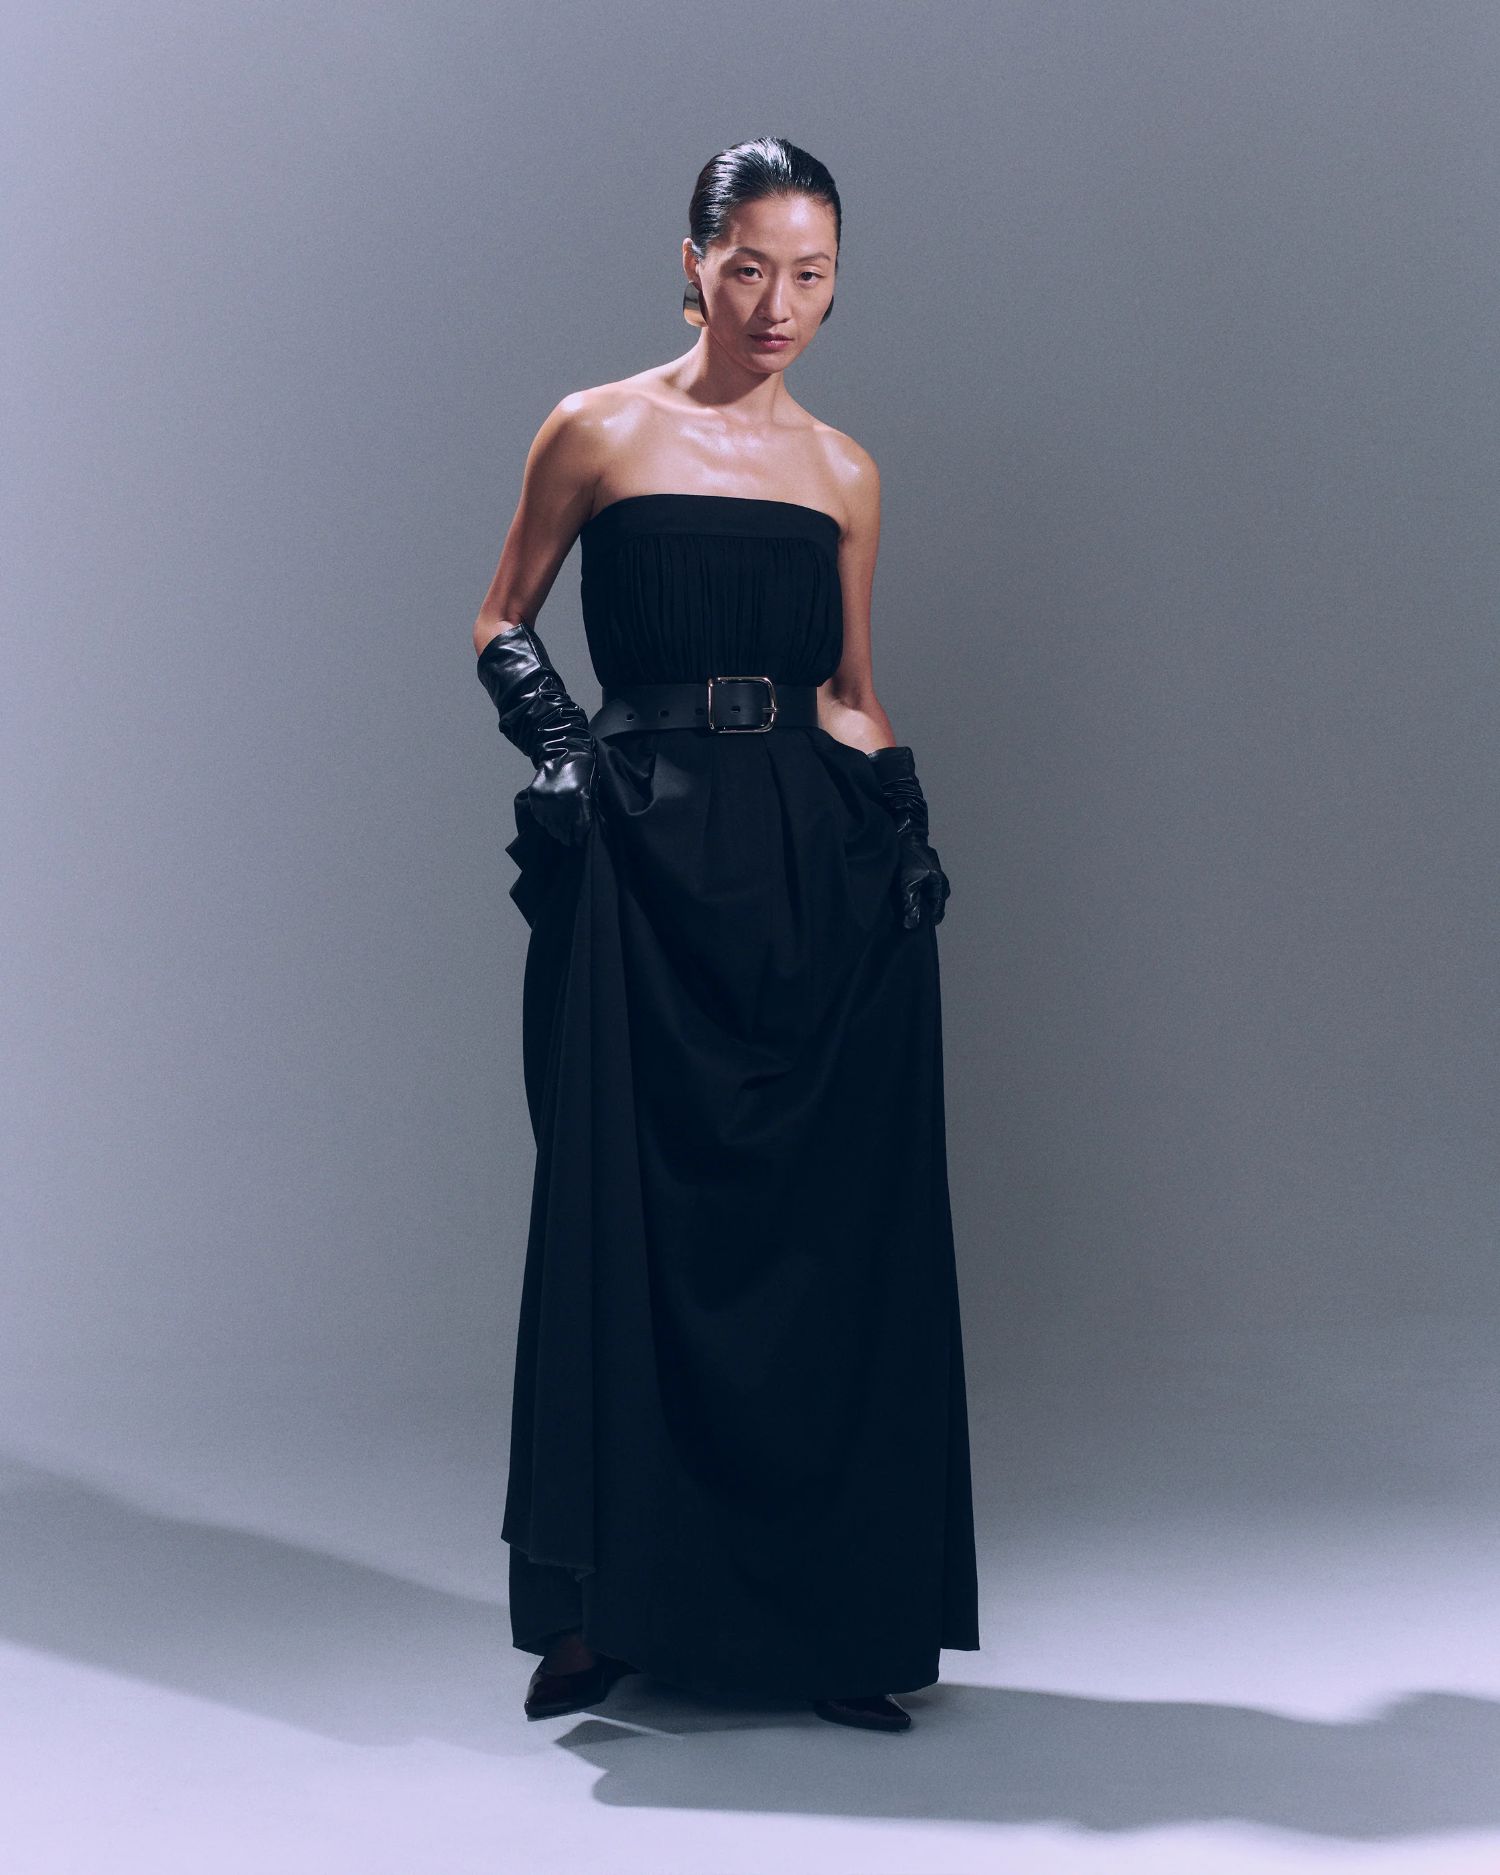 Mia Kwon by Mat + Kat & Elly McGaw for Michelle Rhee Resort 2024 Lookbook